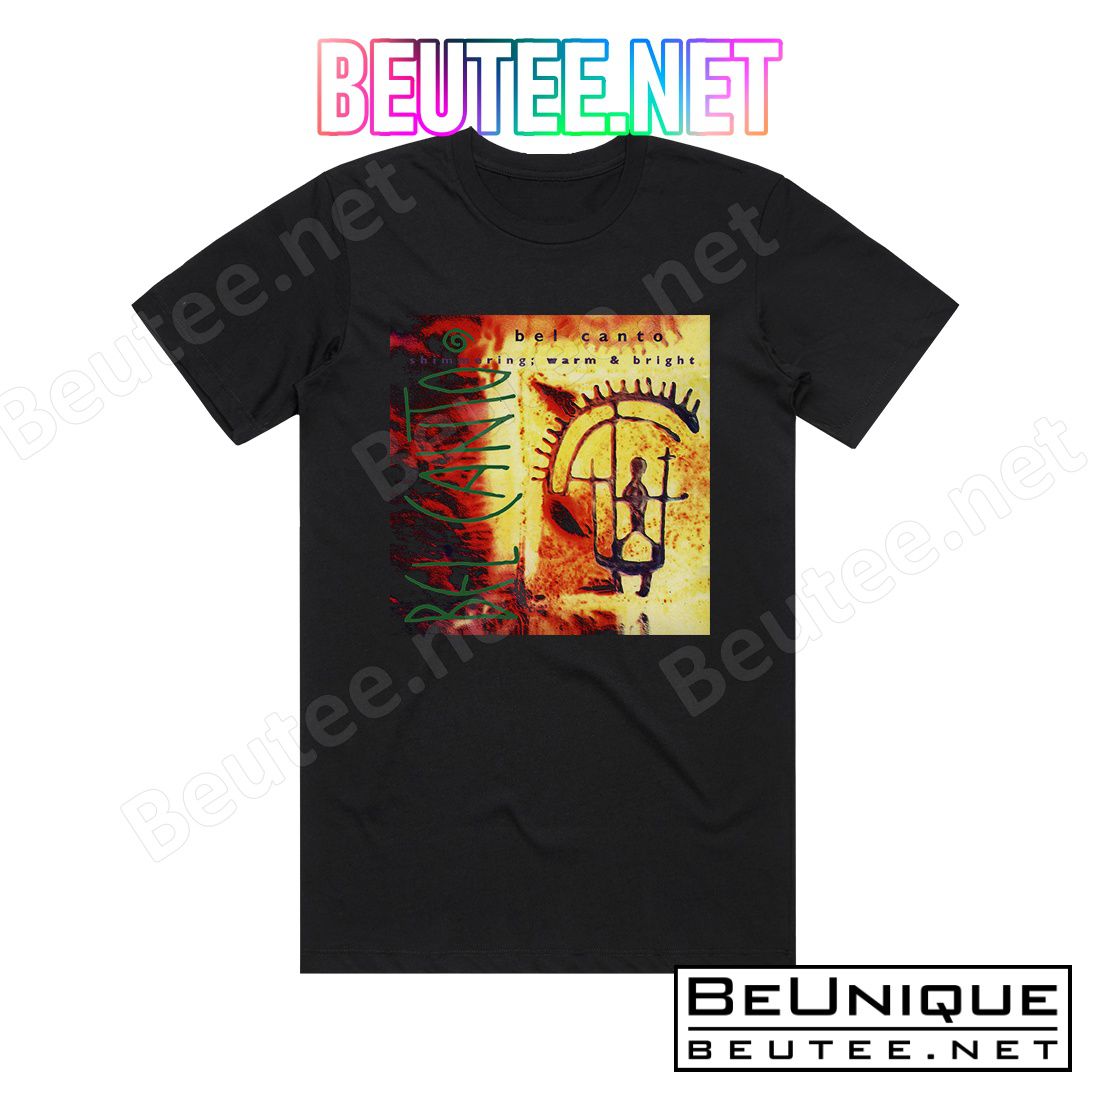 Bel Canto Shimmering Warm Bright 1 Album Cover T-Shirt